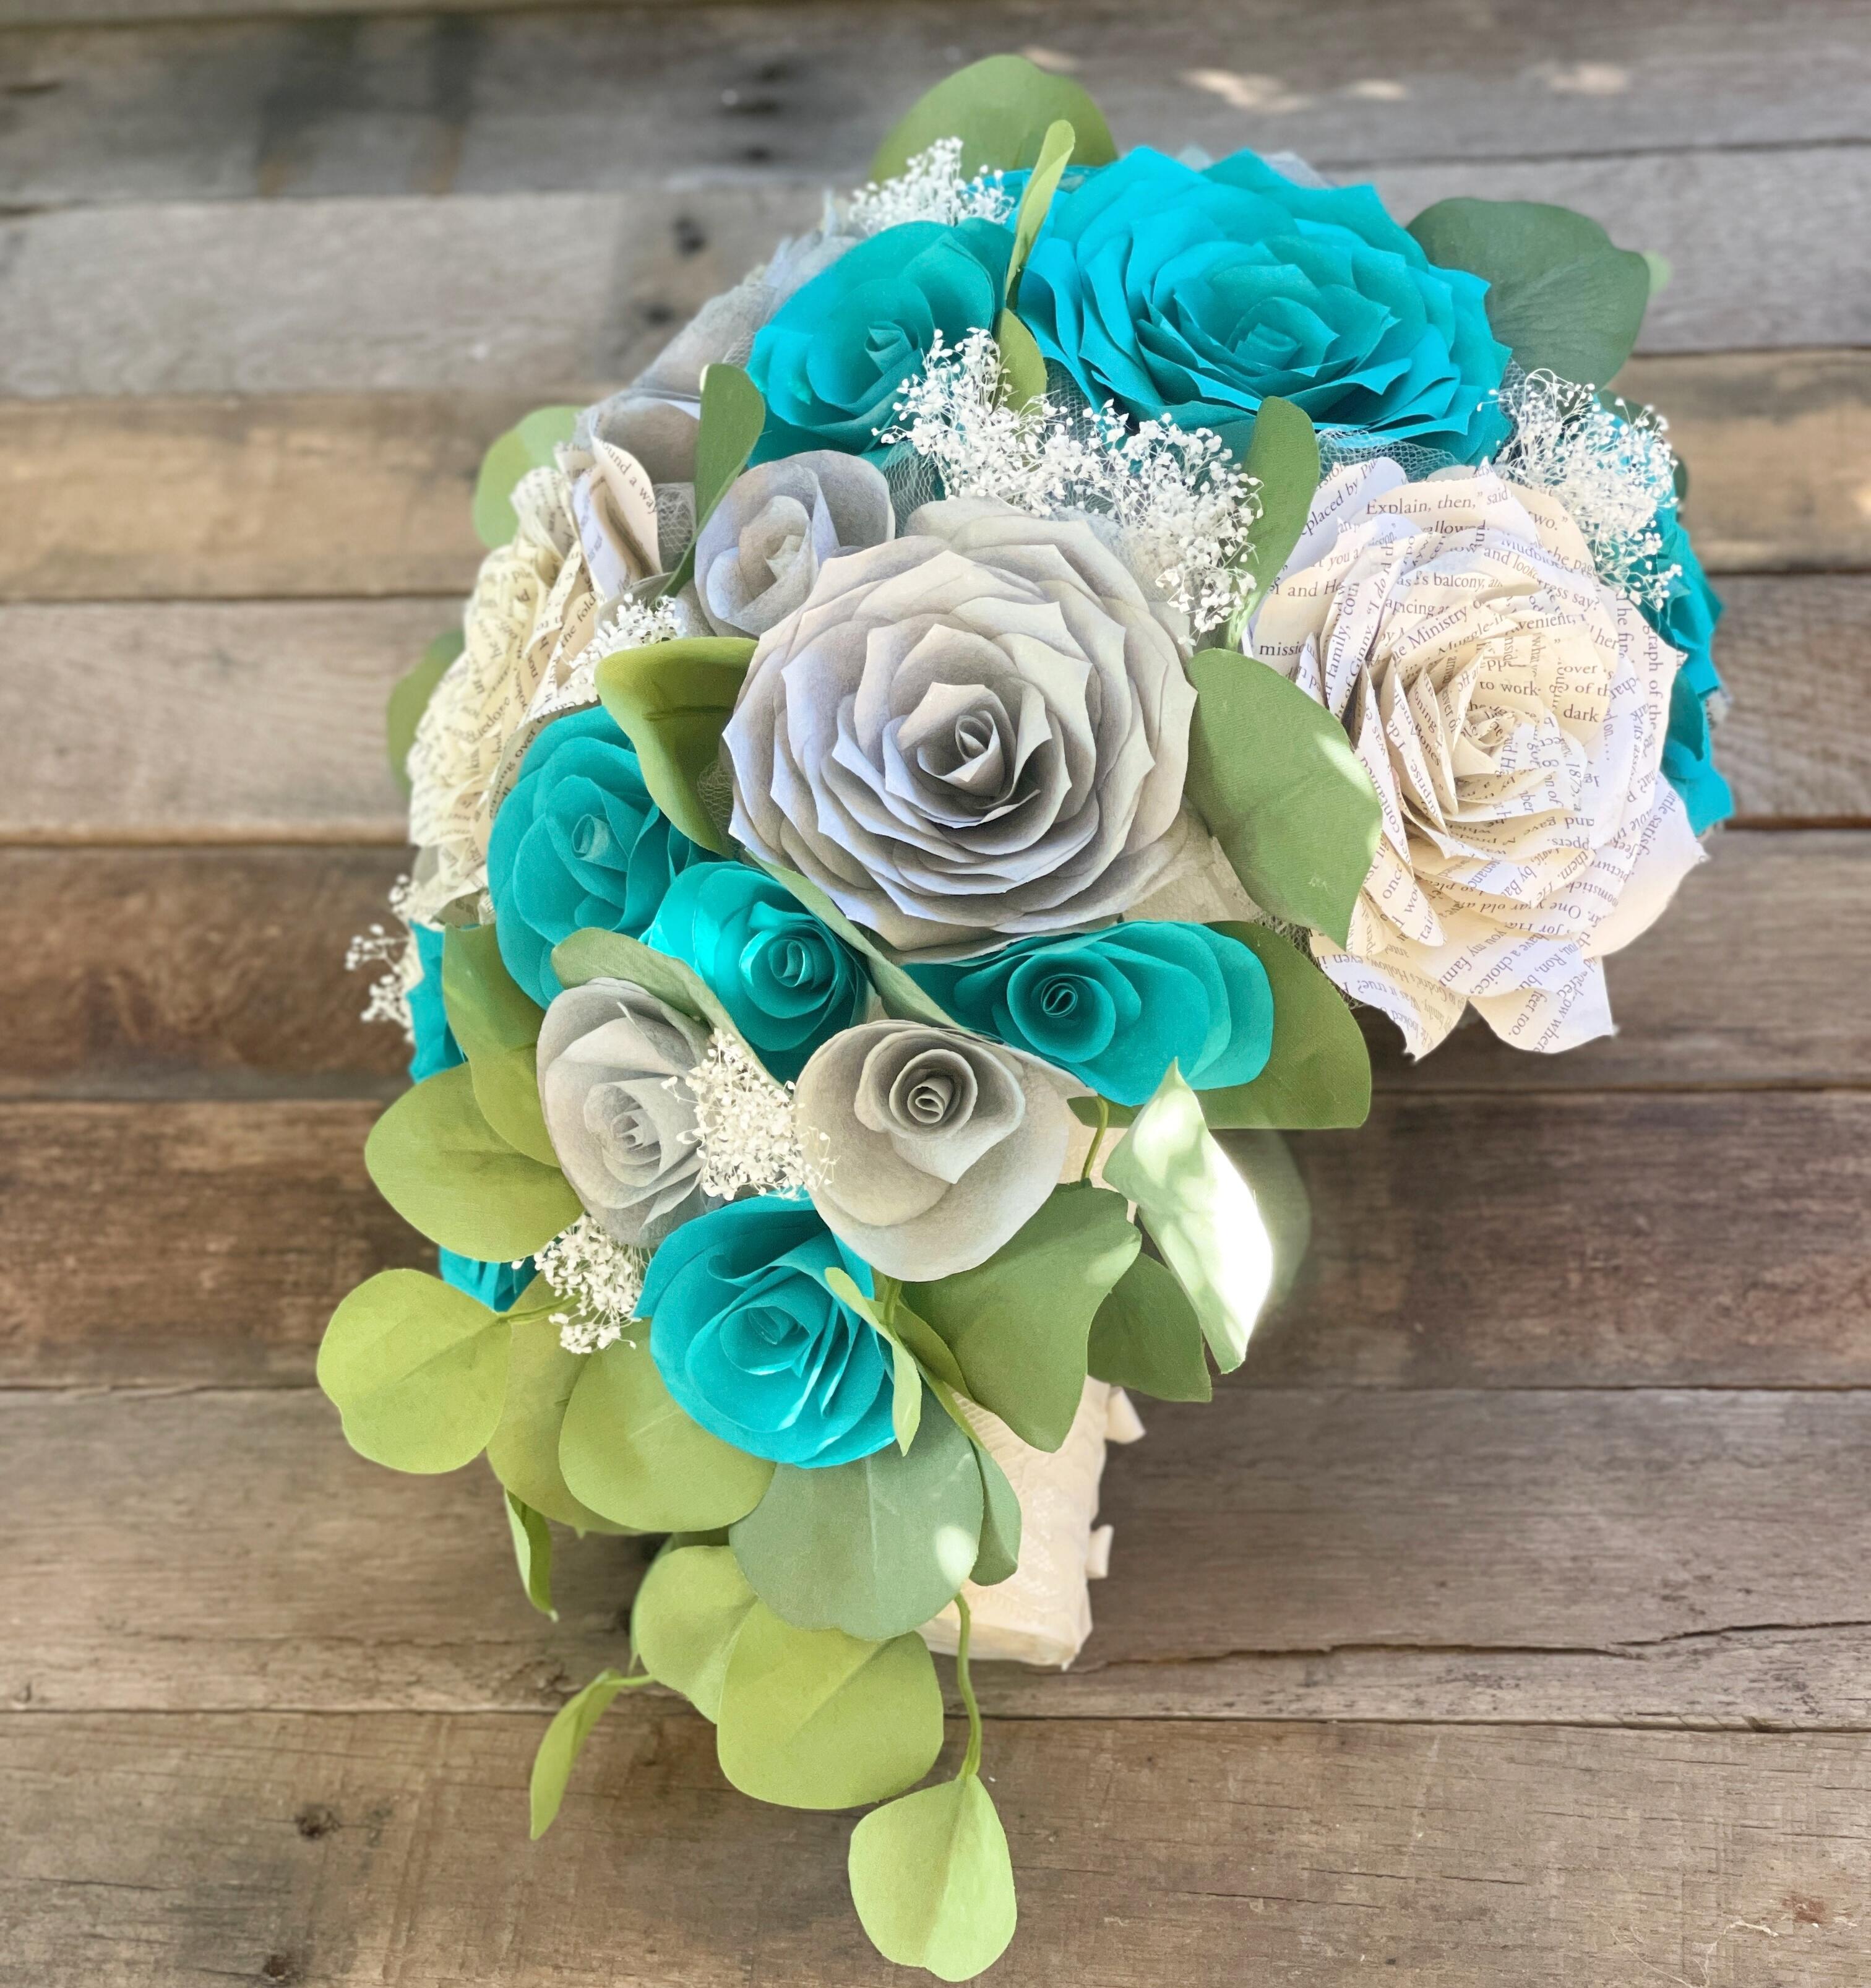 Wedding Bouquet, Bridal Bouquet, Bridesmaid Bouquet,bridal Paper  Flower,paper Flower Bouquet,gray and White Roses, 